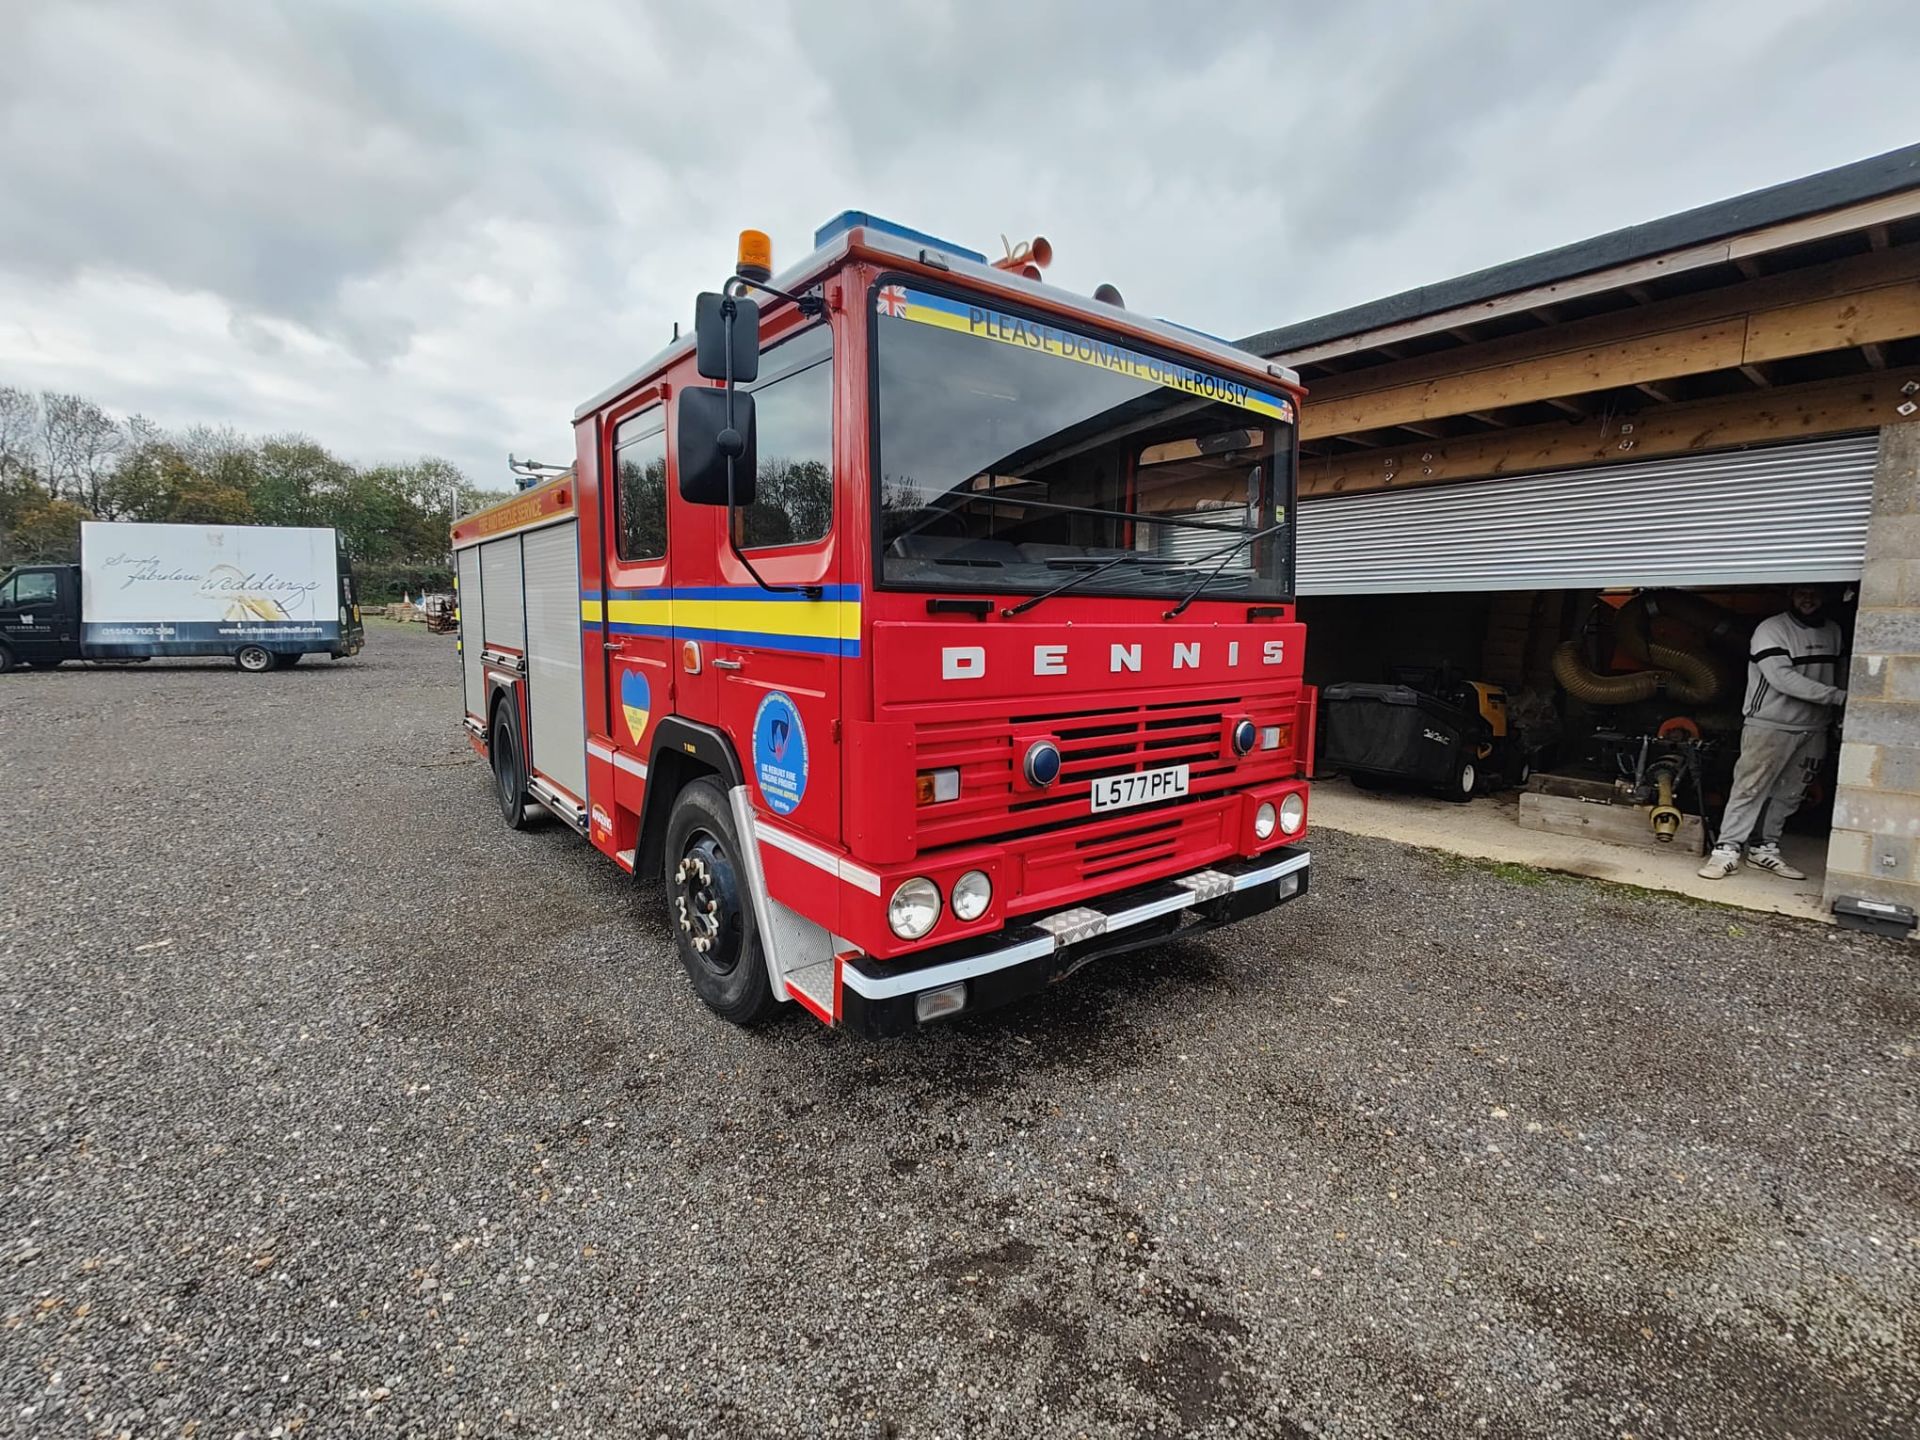 DENNIS FIRE ENGINE TRUCK - RESERVE LOWERED!!! PRICED TO CLEAR - Image 9 of 9